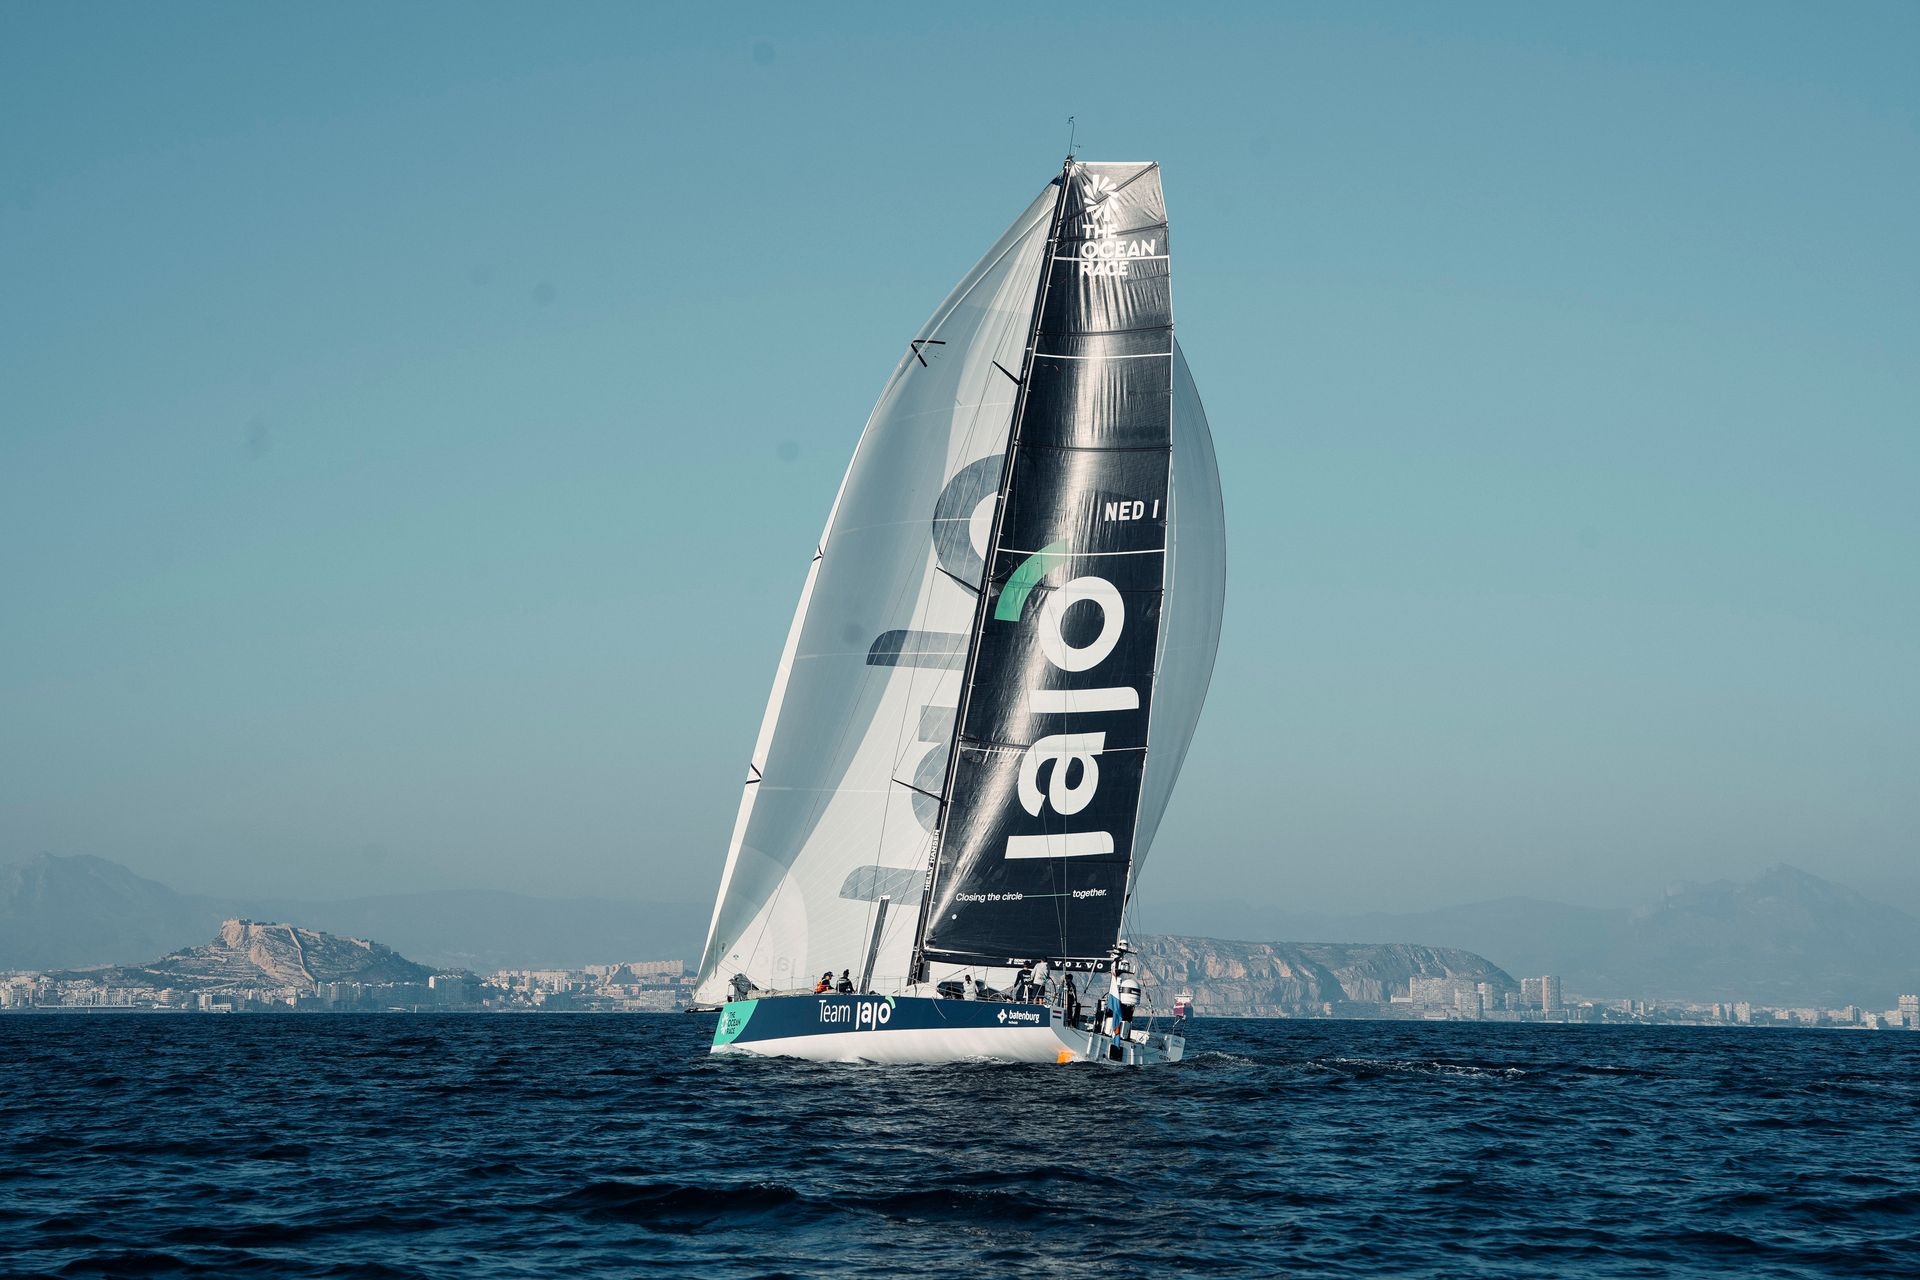 Team JAJO is complete to start The Ocean Race